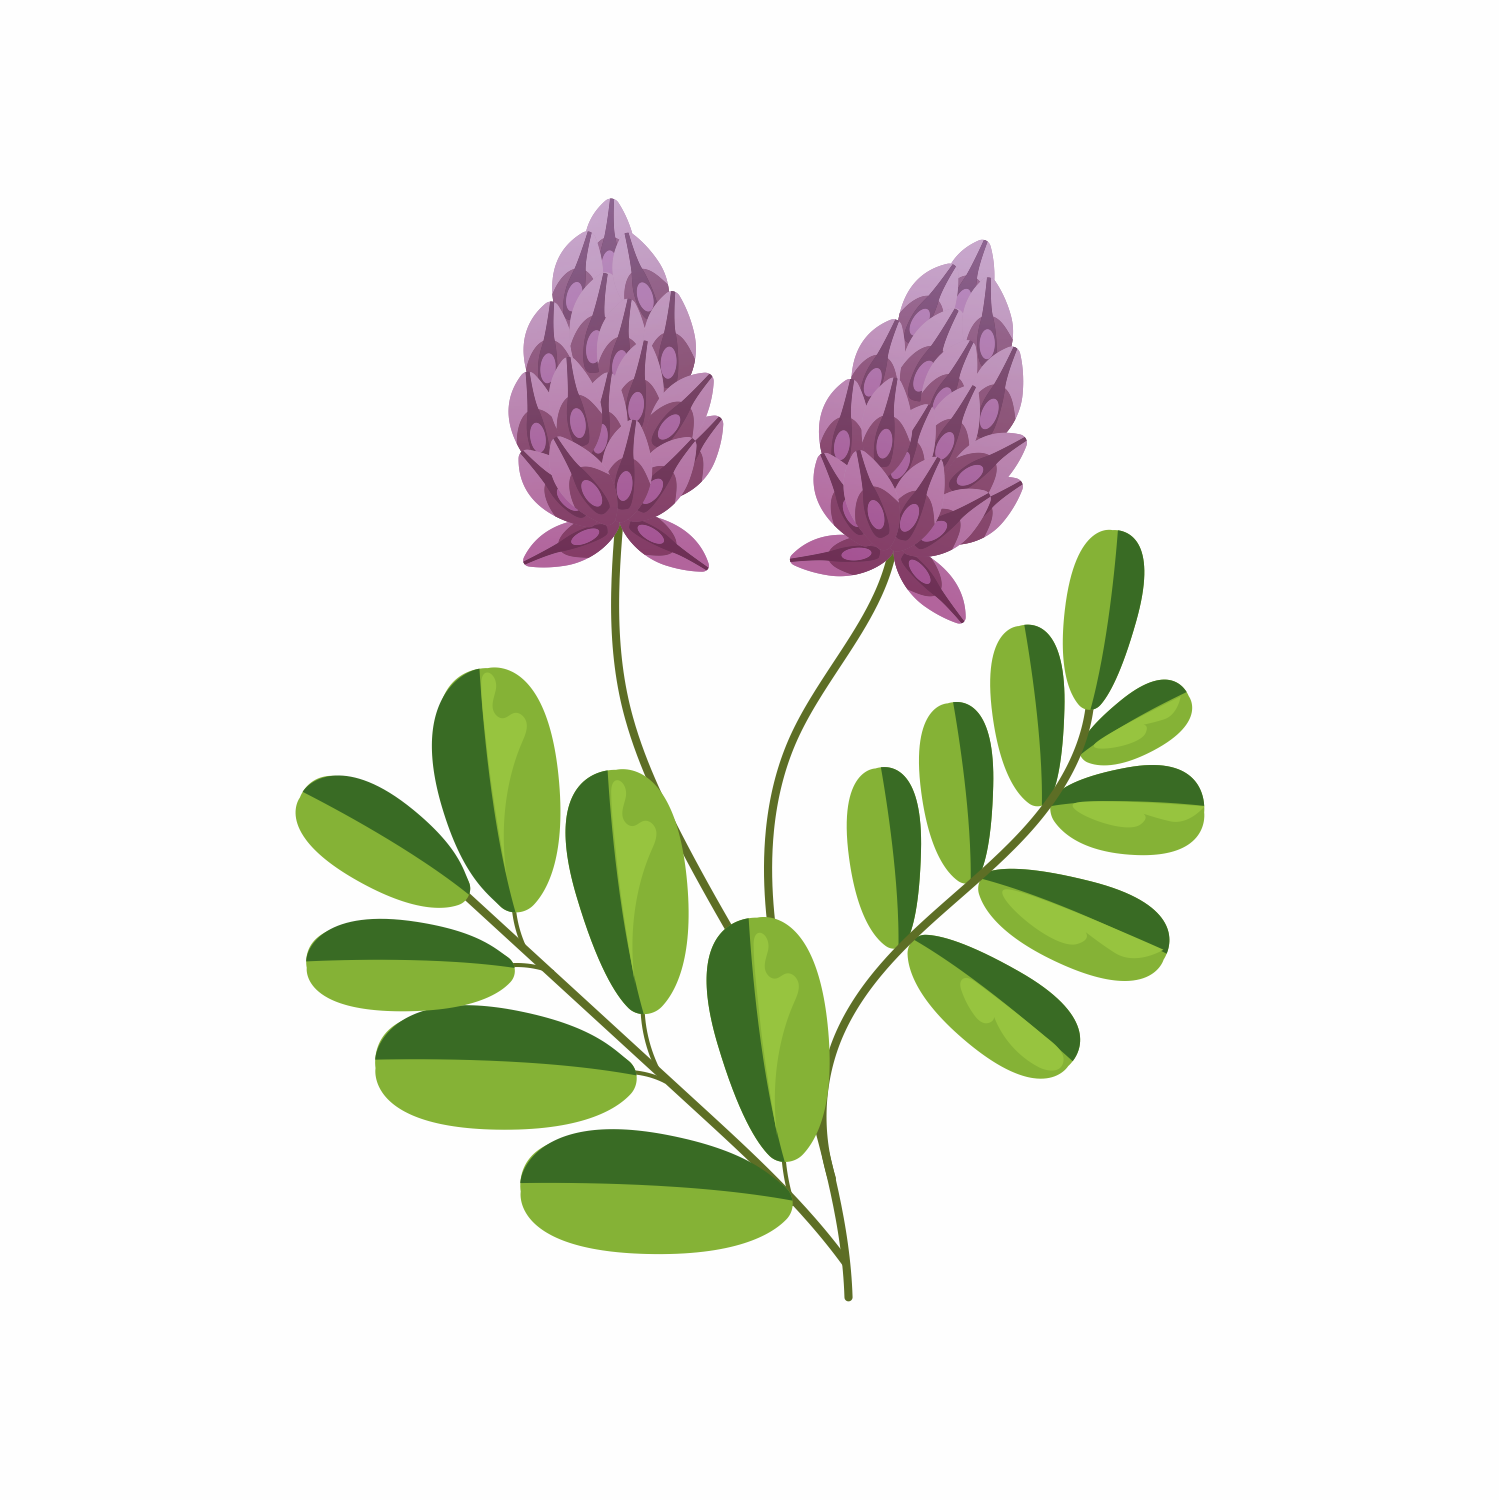 Glycyrrhiza Glabra (Licorice) Extract: A natural skincare ingredient for brighter, more even skin